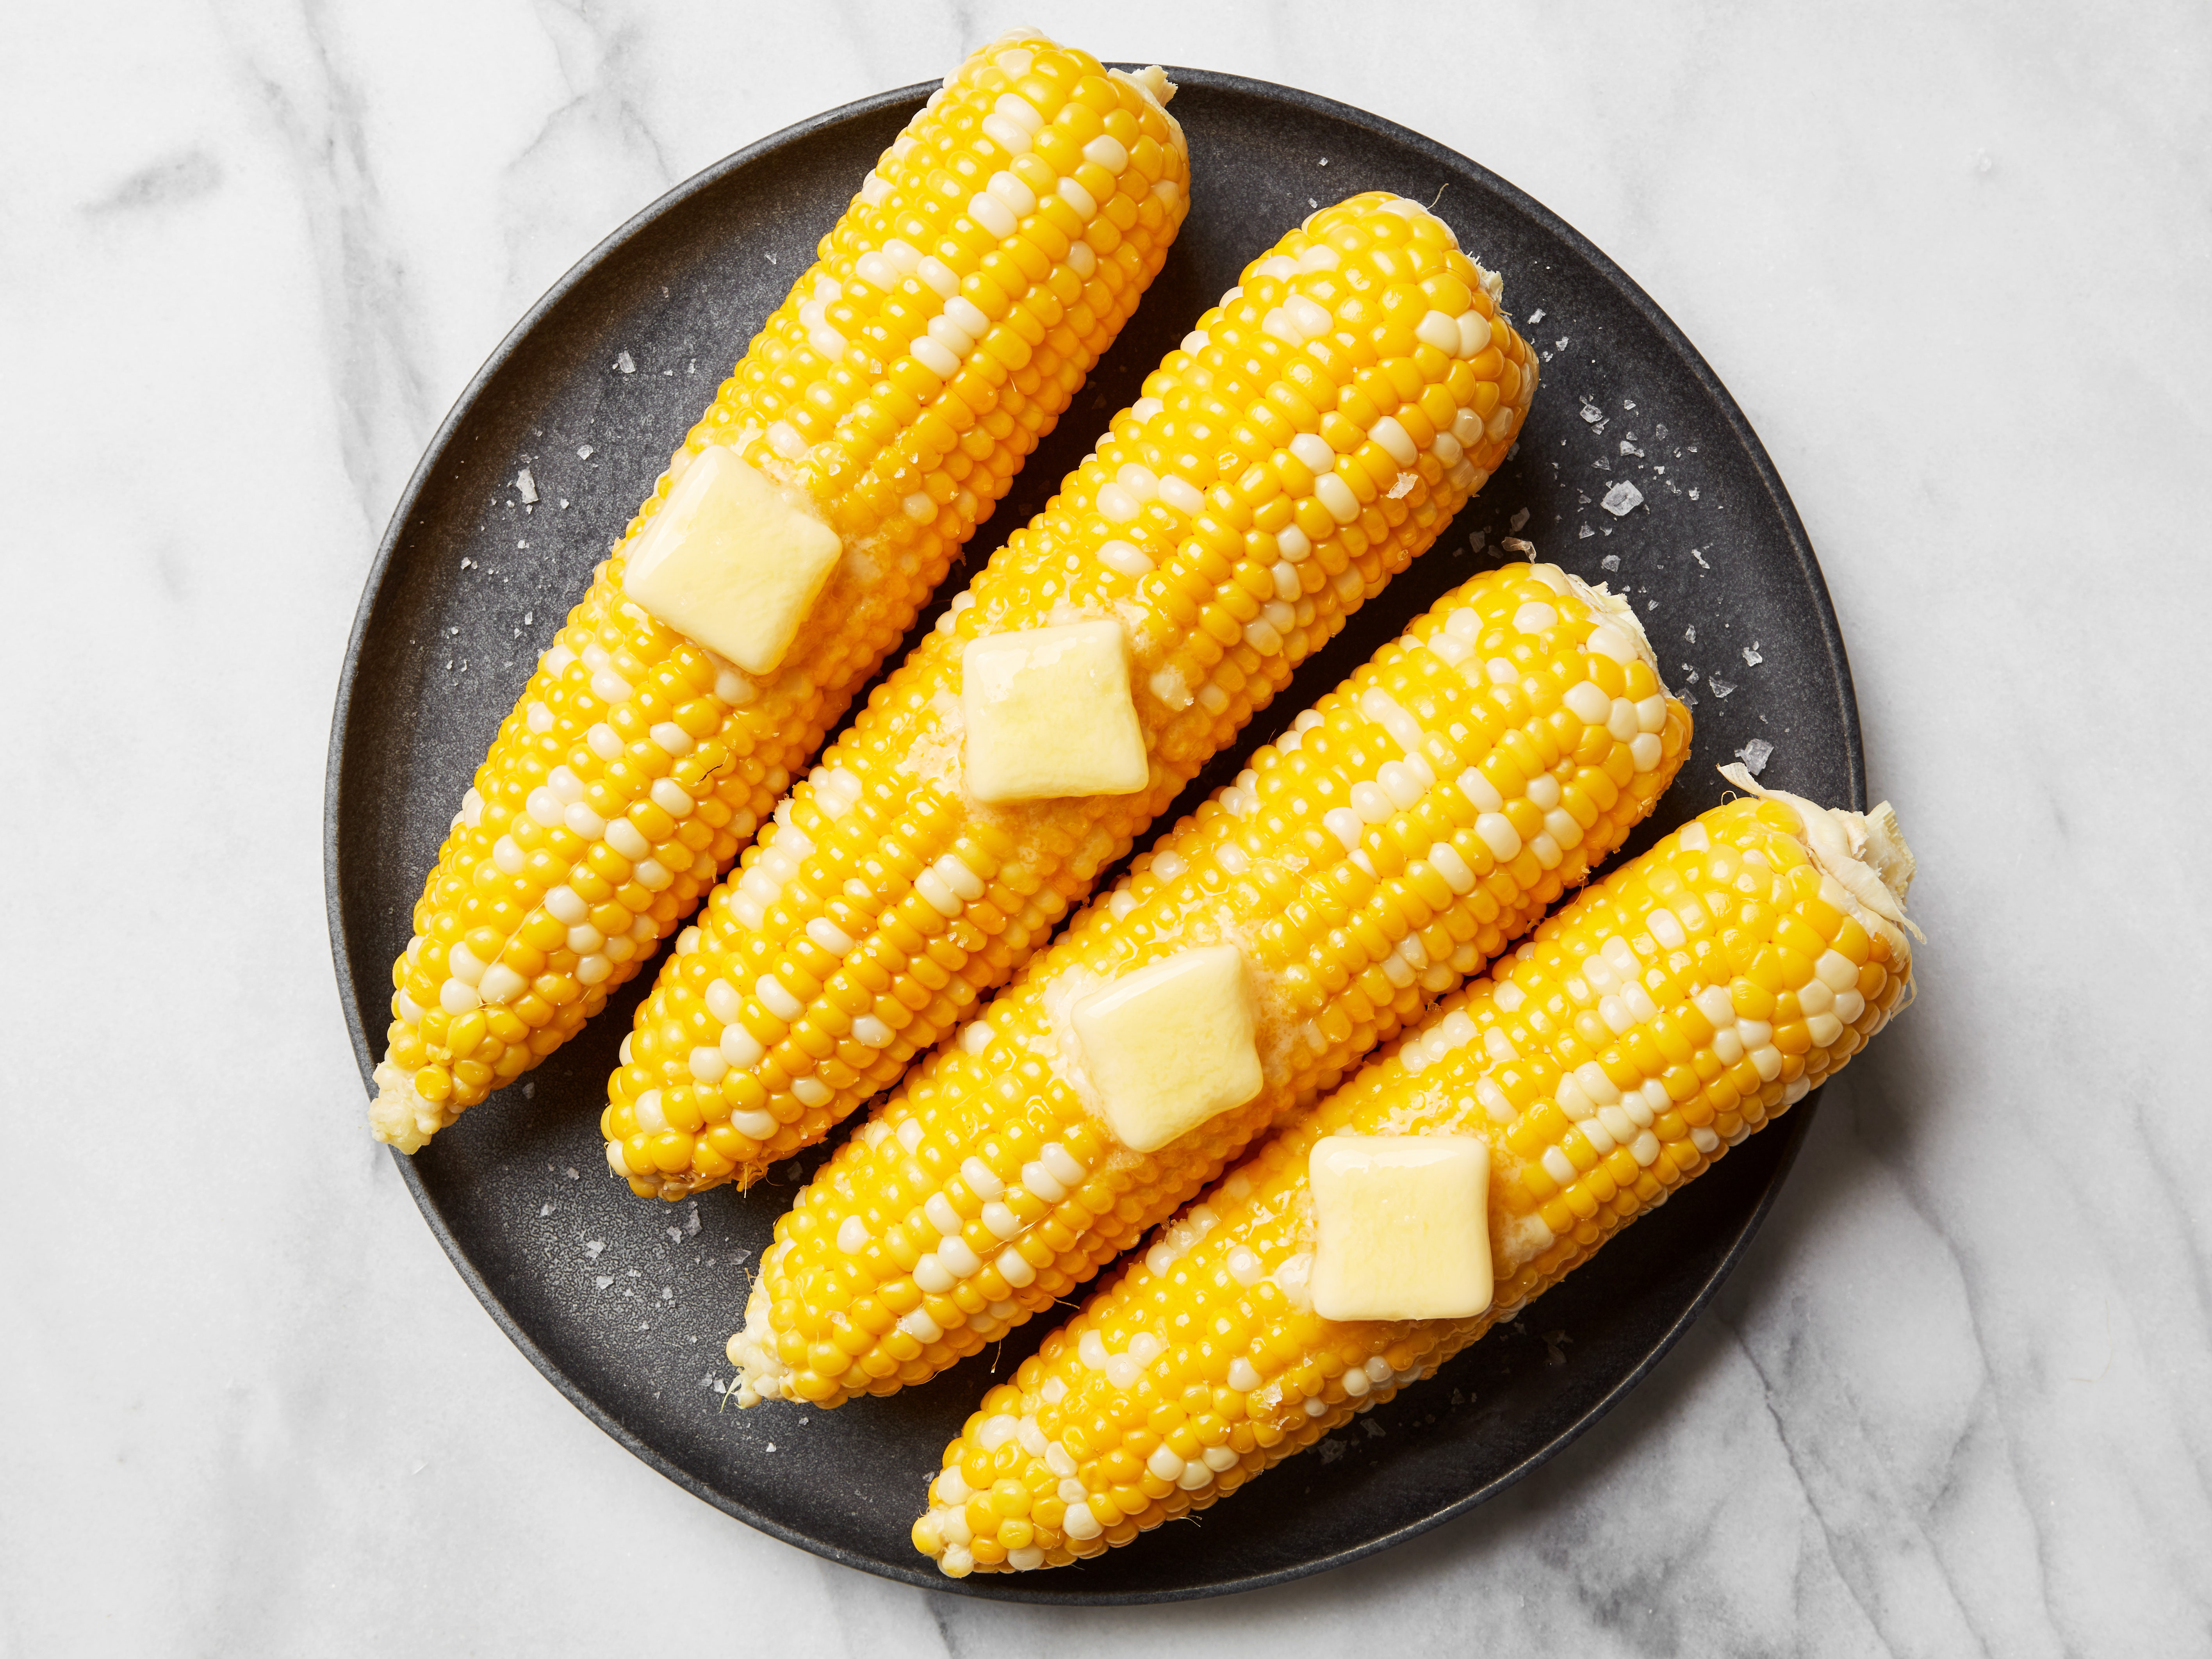 carole farnsworth recommends pictures of corn on the cob pic